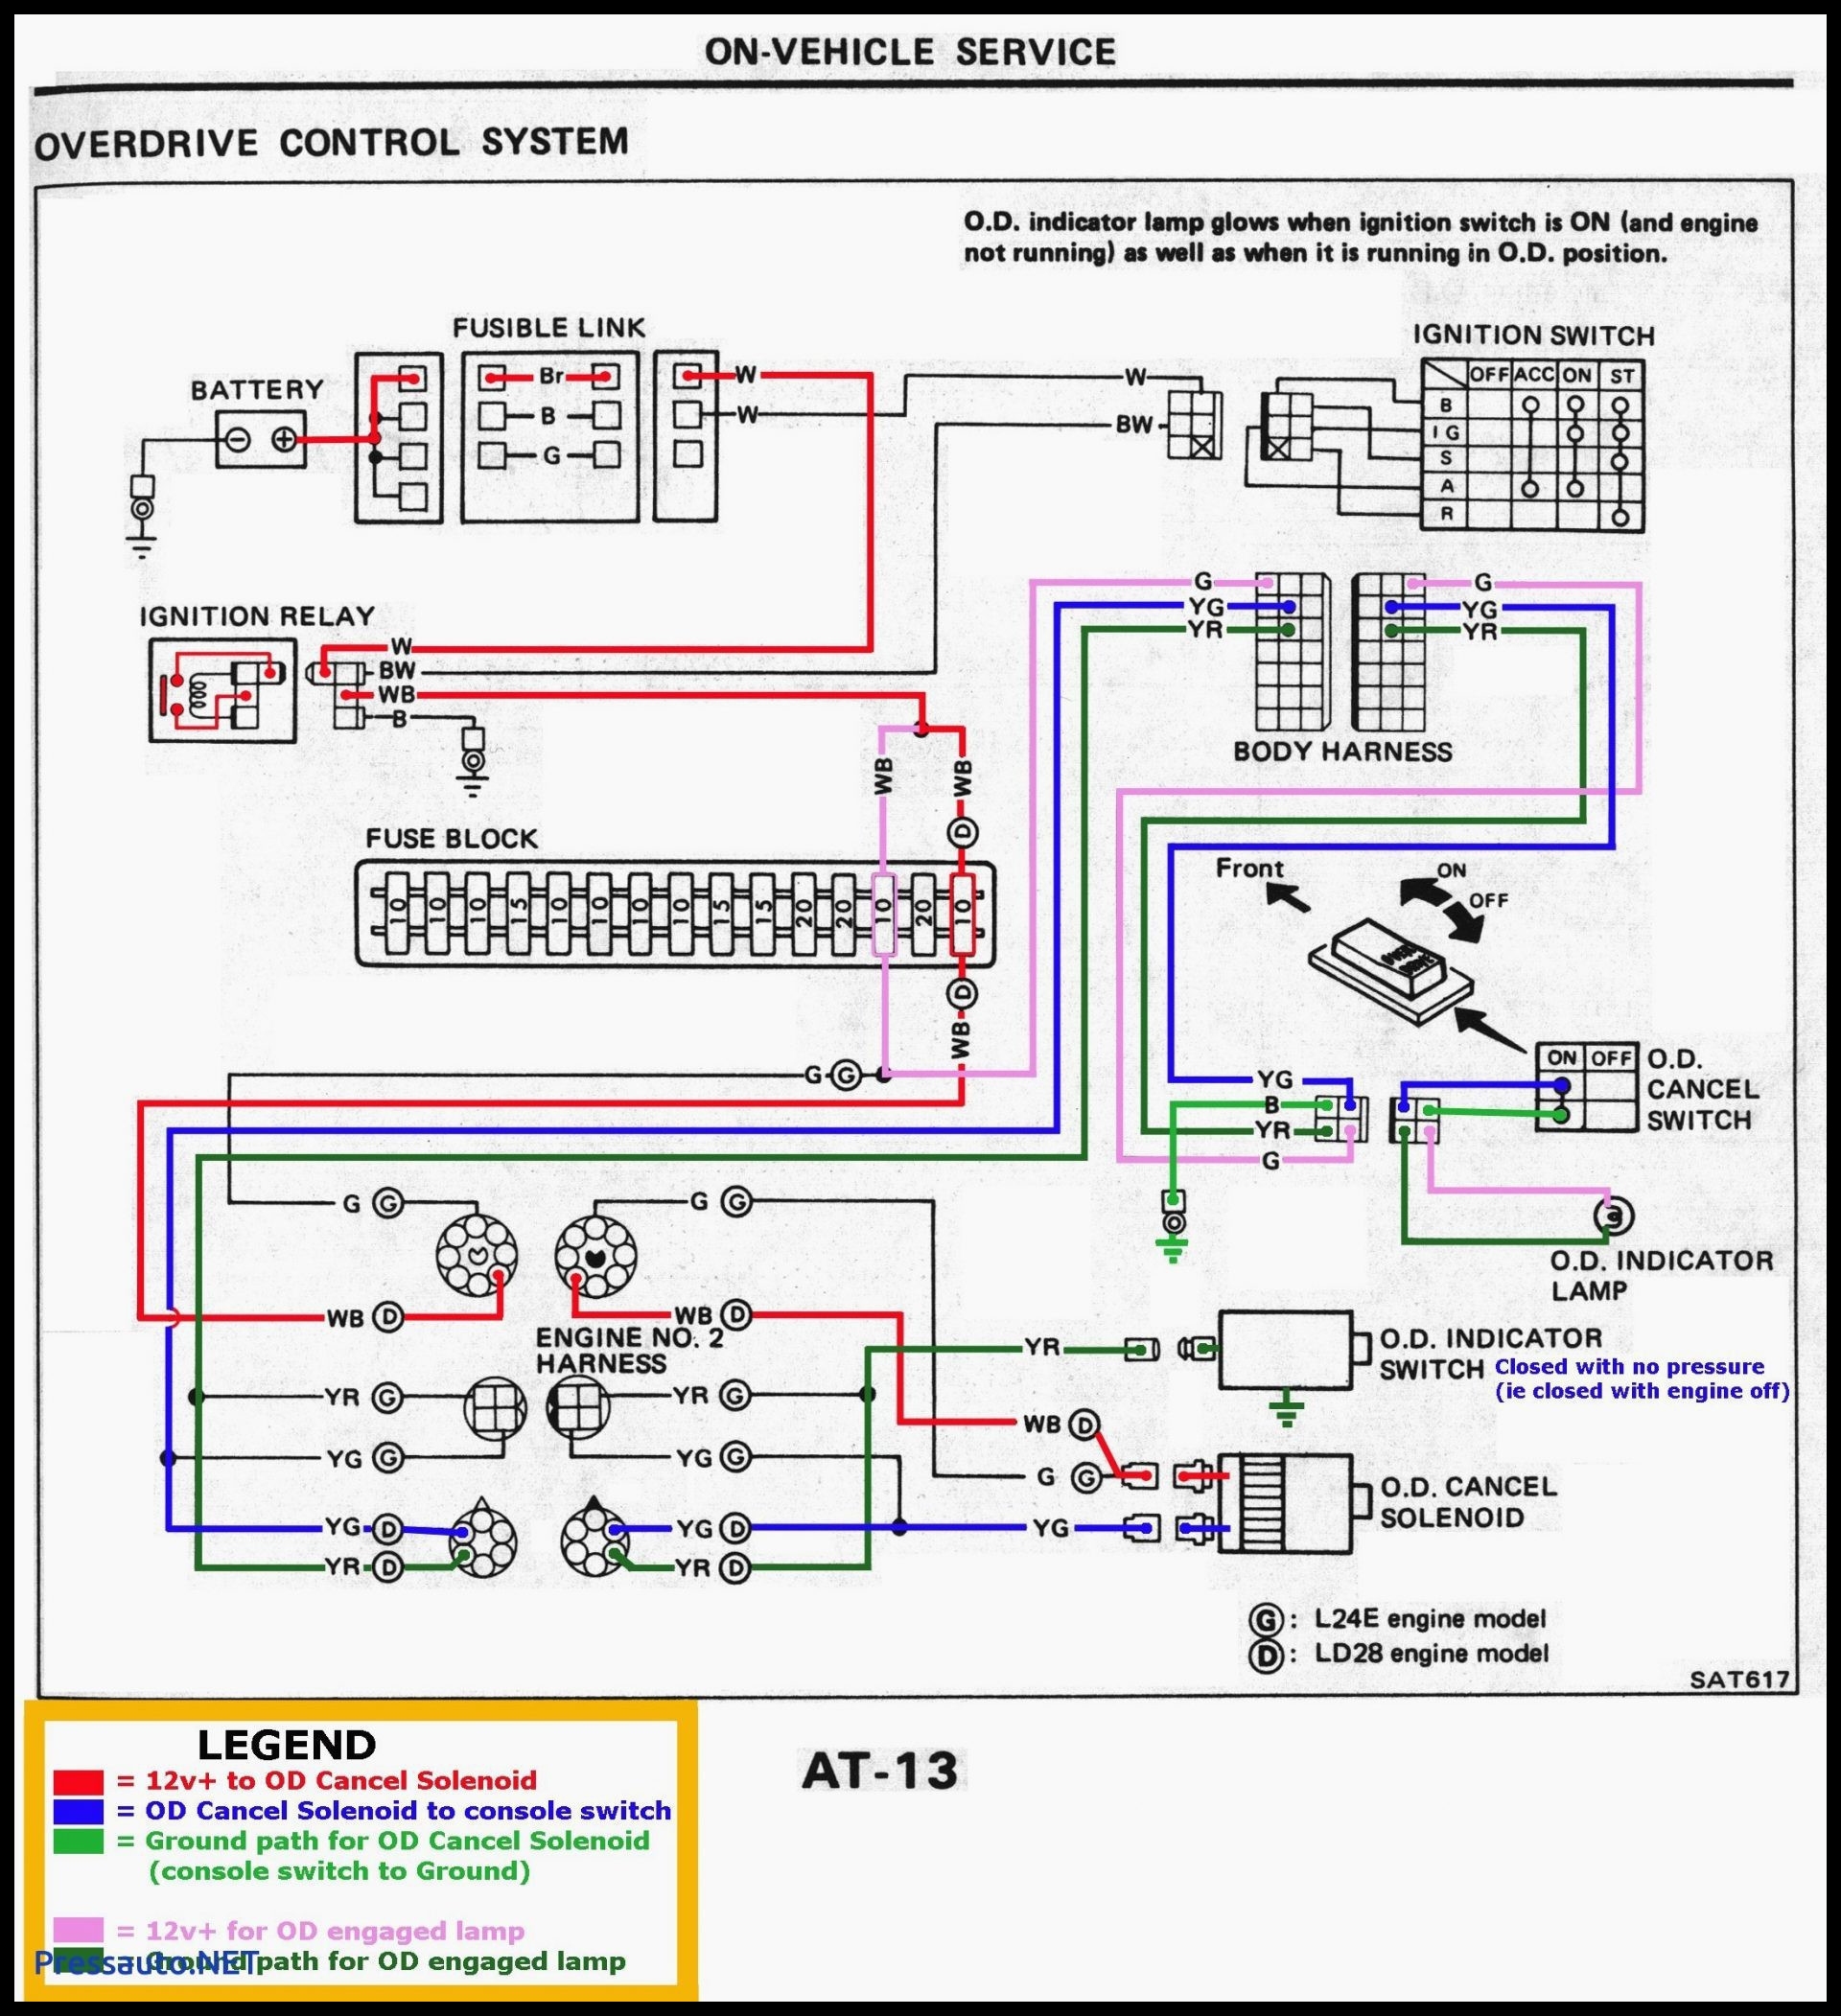 2011 Toyota Camry Wiring Diagram Mikulskilawoffices 2011 Toyota Camry Wiring Diagram Front Tire 2011 Toyota Camry Wiring Diagram